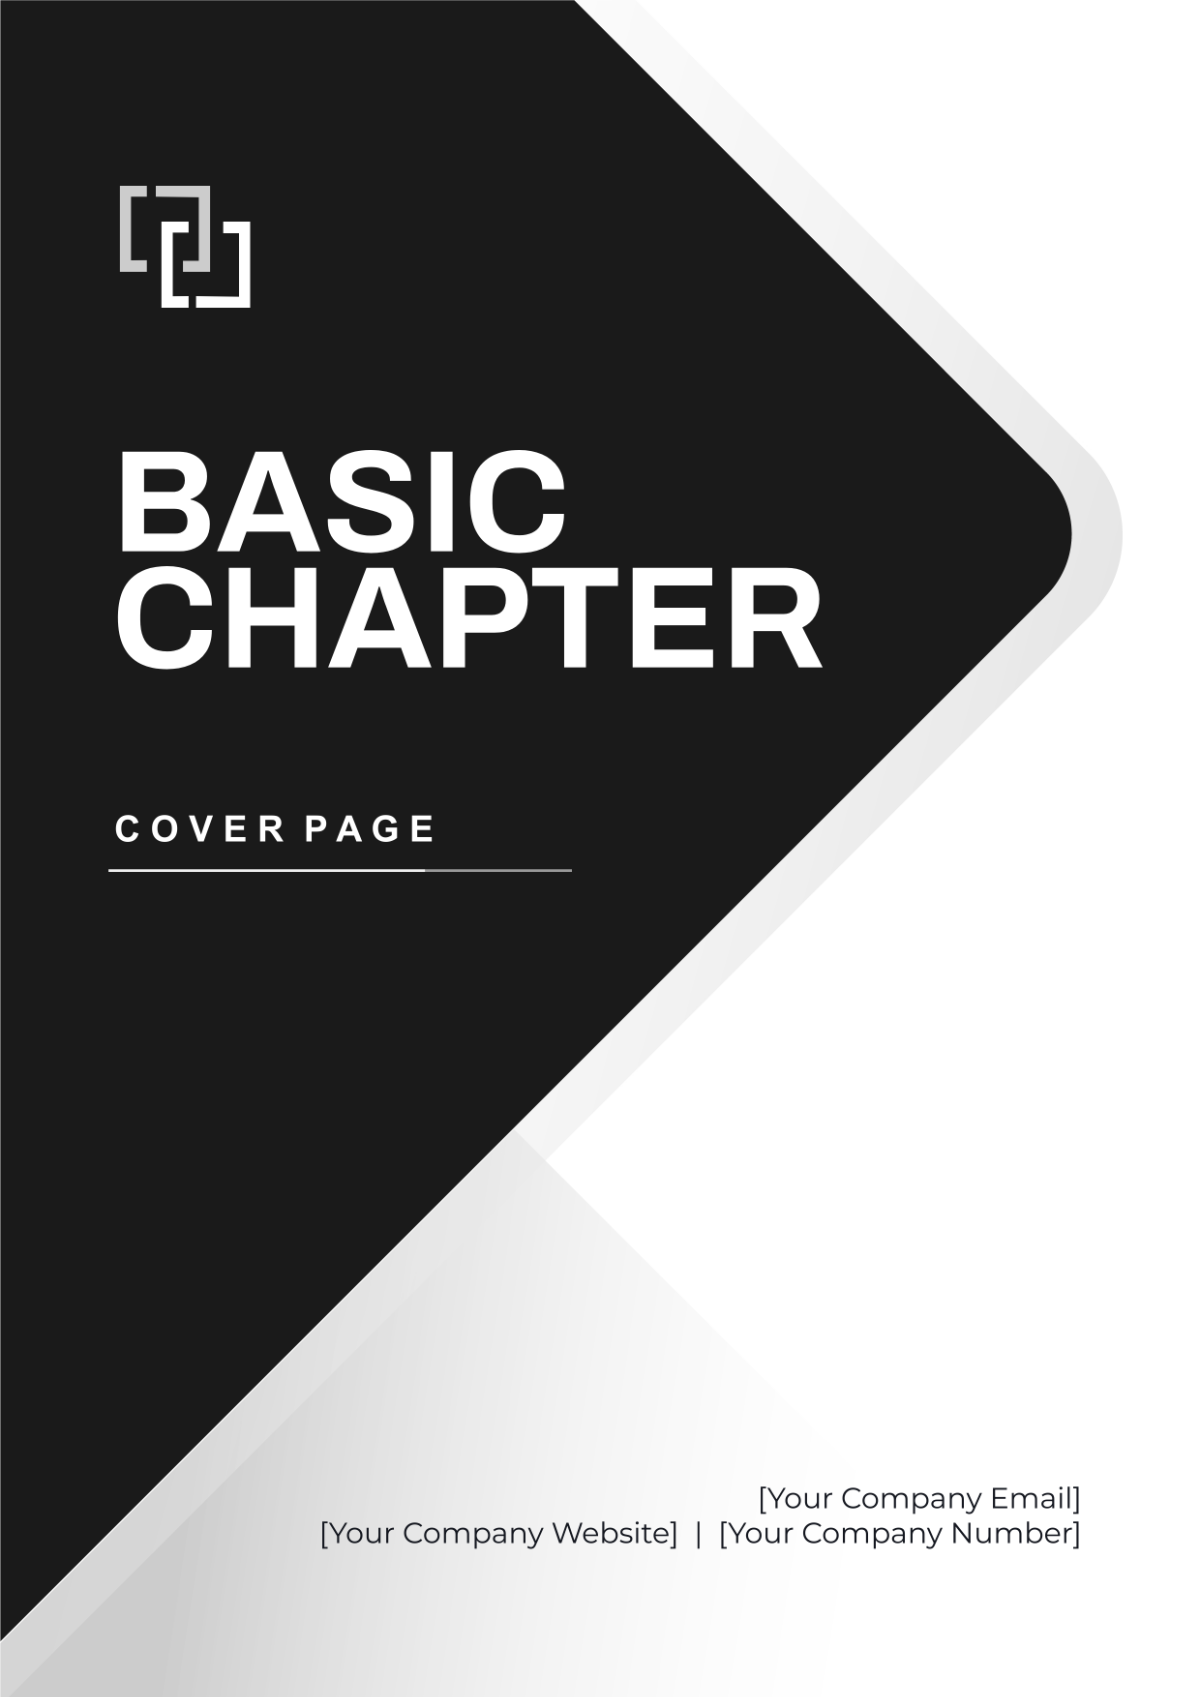 Basic Chapter Cover Page